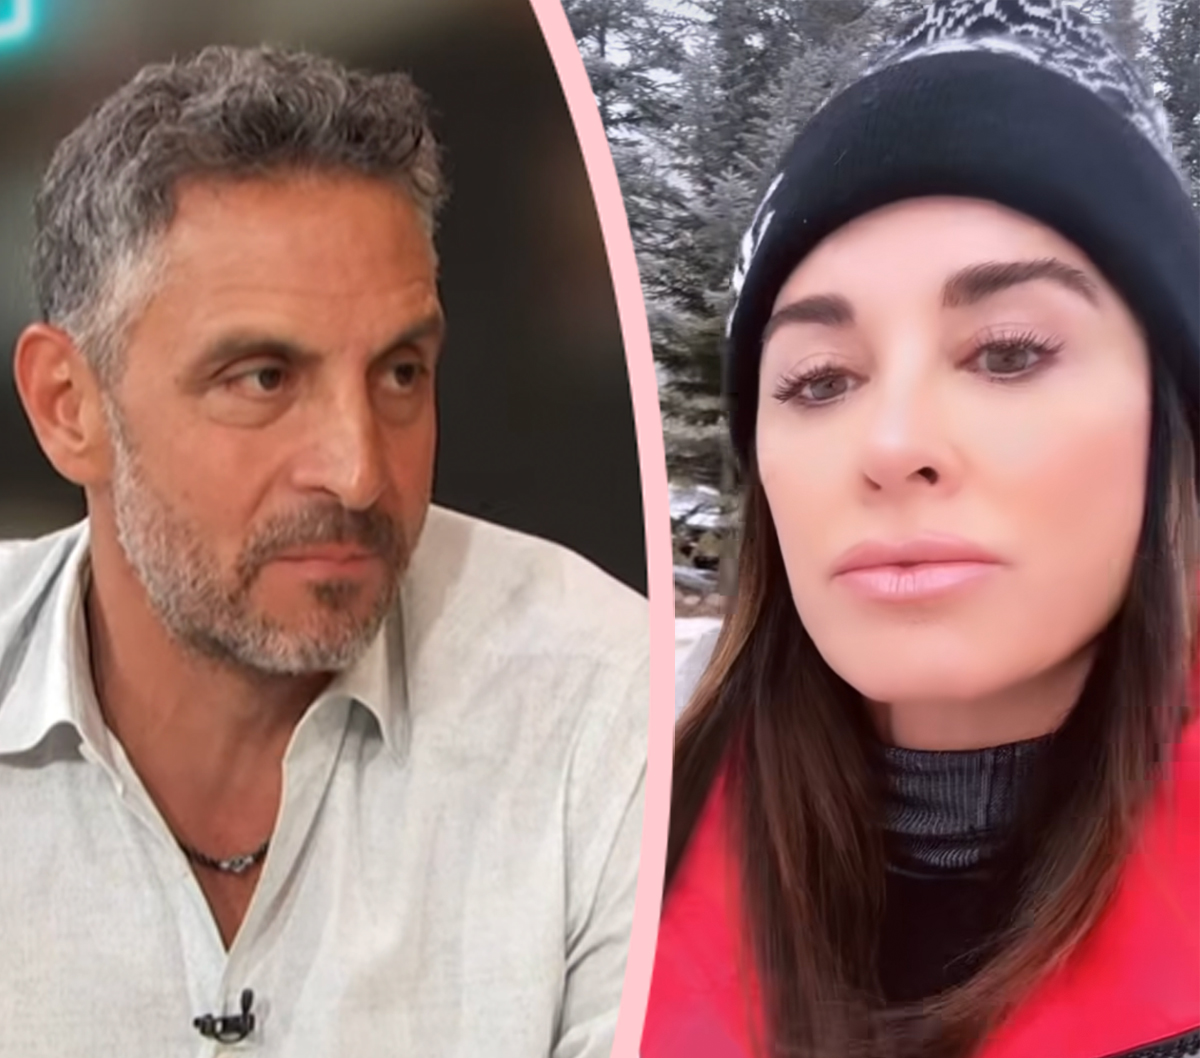 #Awkward! Kyle Richards & Mauricio Umansky Reunite For Family Ski Trip In Aspen After His Partying!